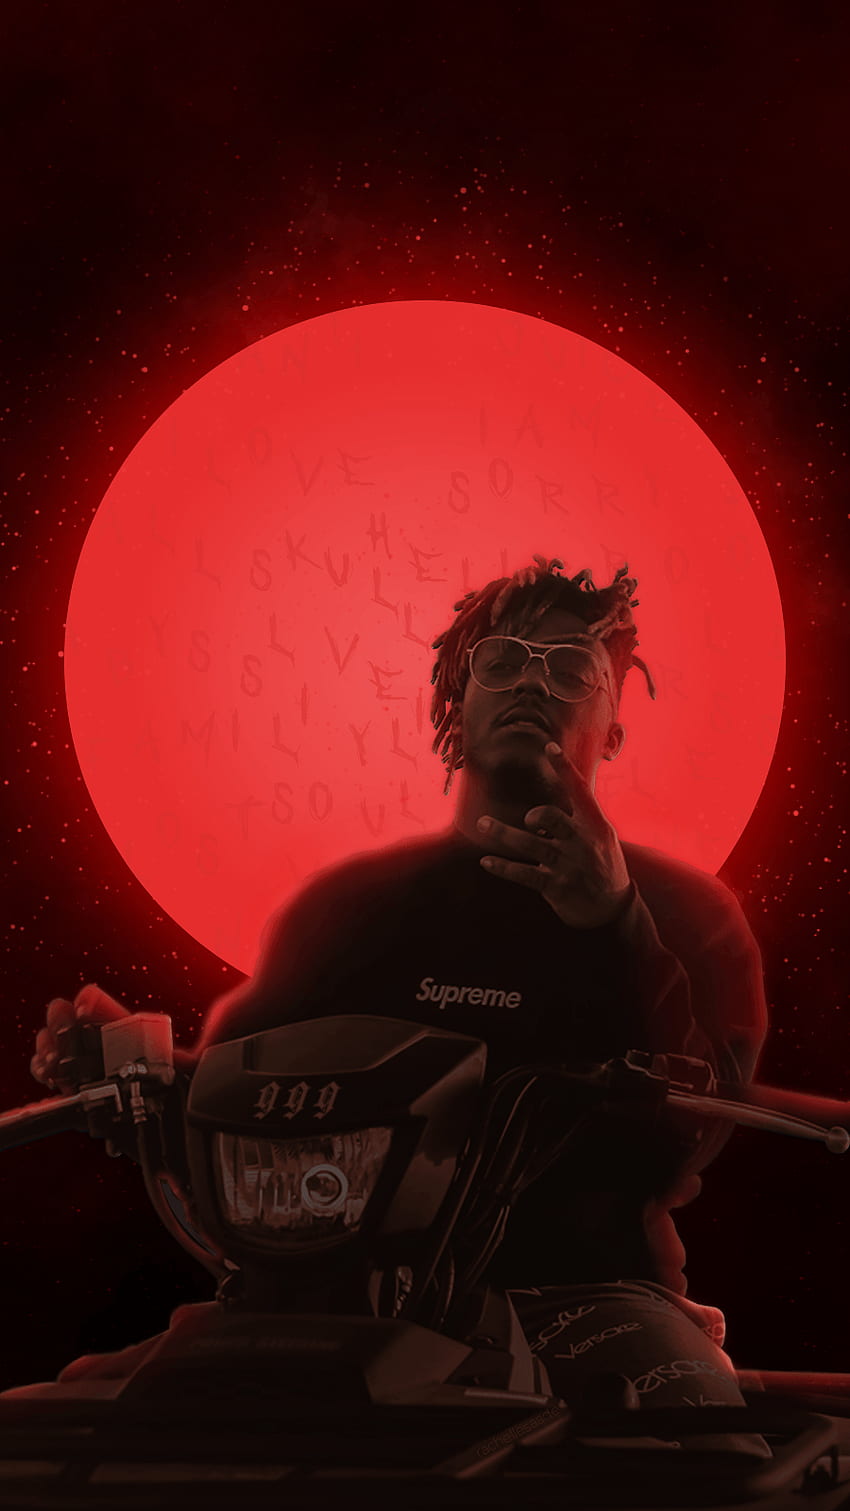 i made this juice wrld edit and thought I'd share it with you here ❤️ 999 forever, Juice Wrld Supreme HD phone wallpaper